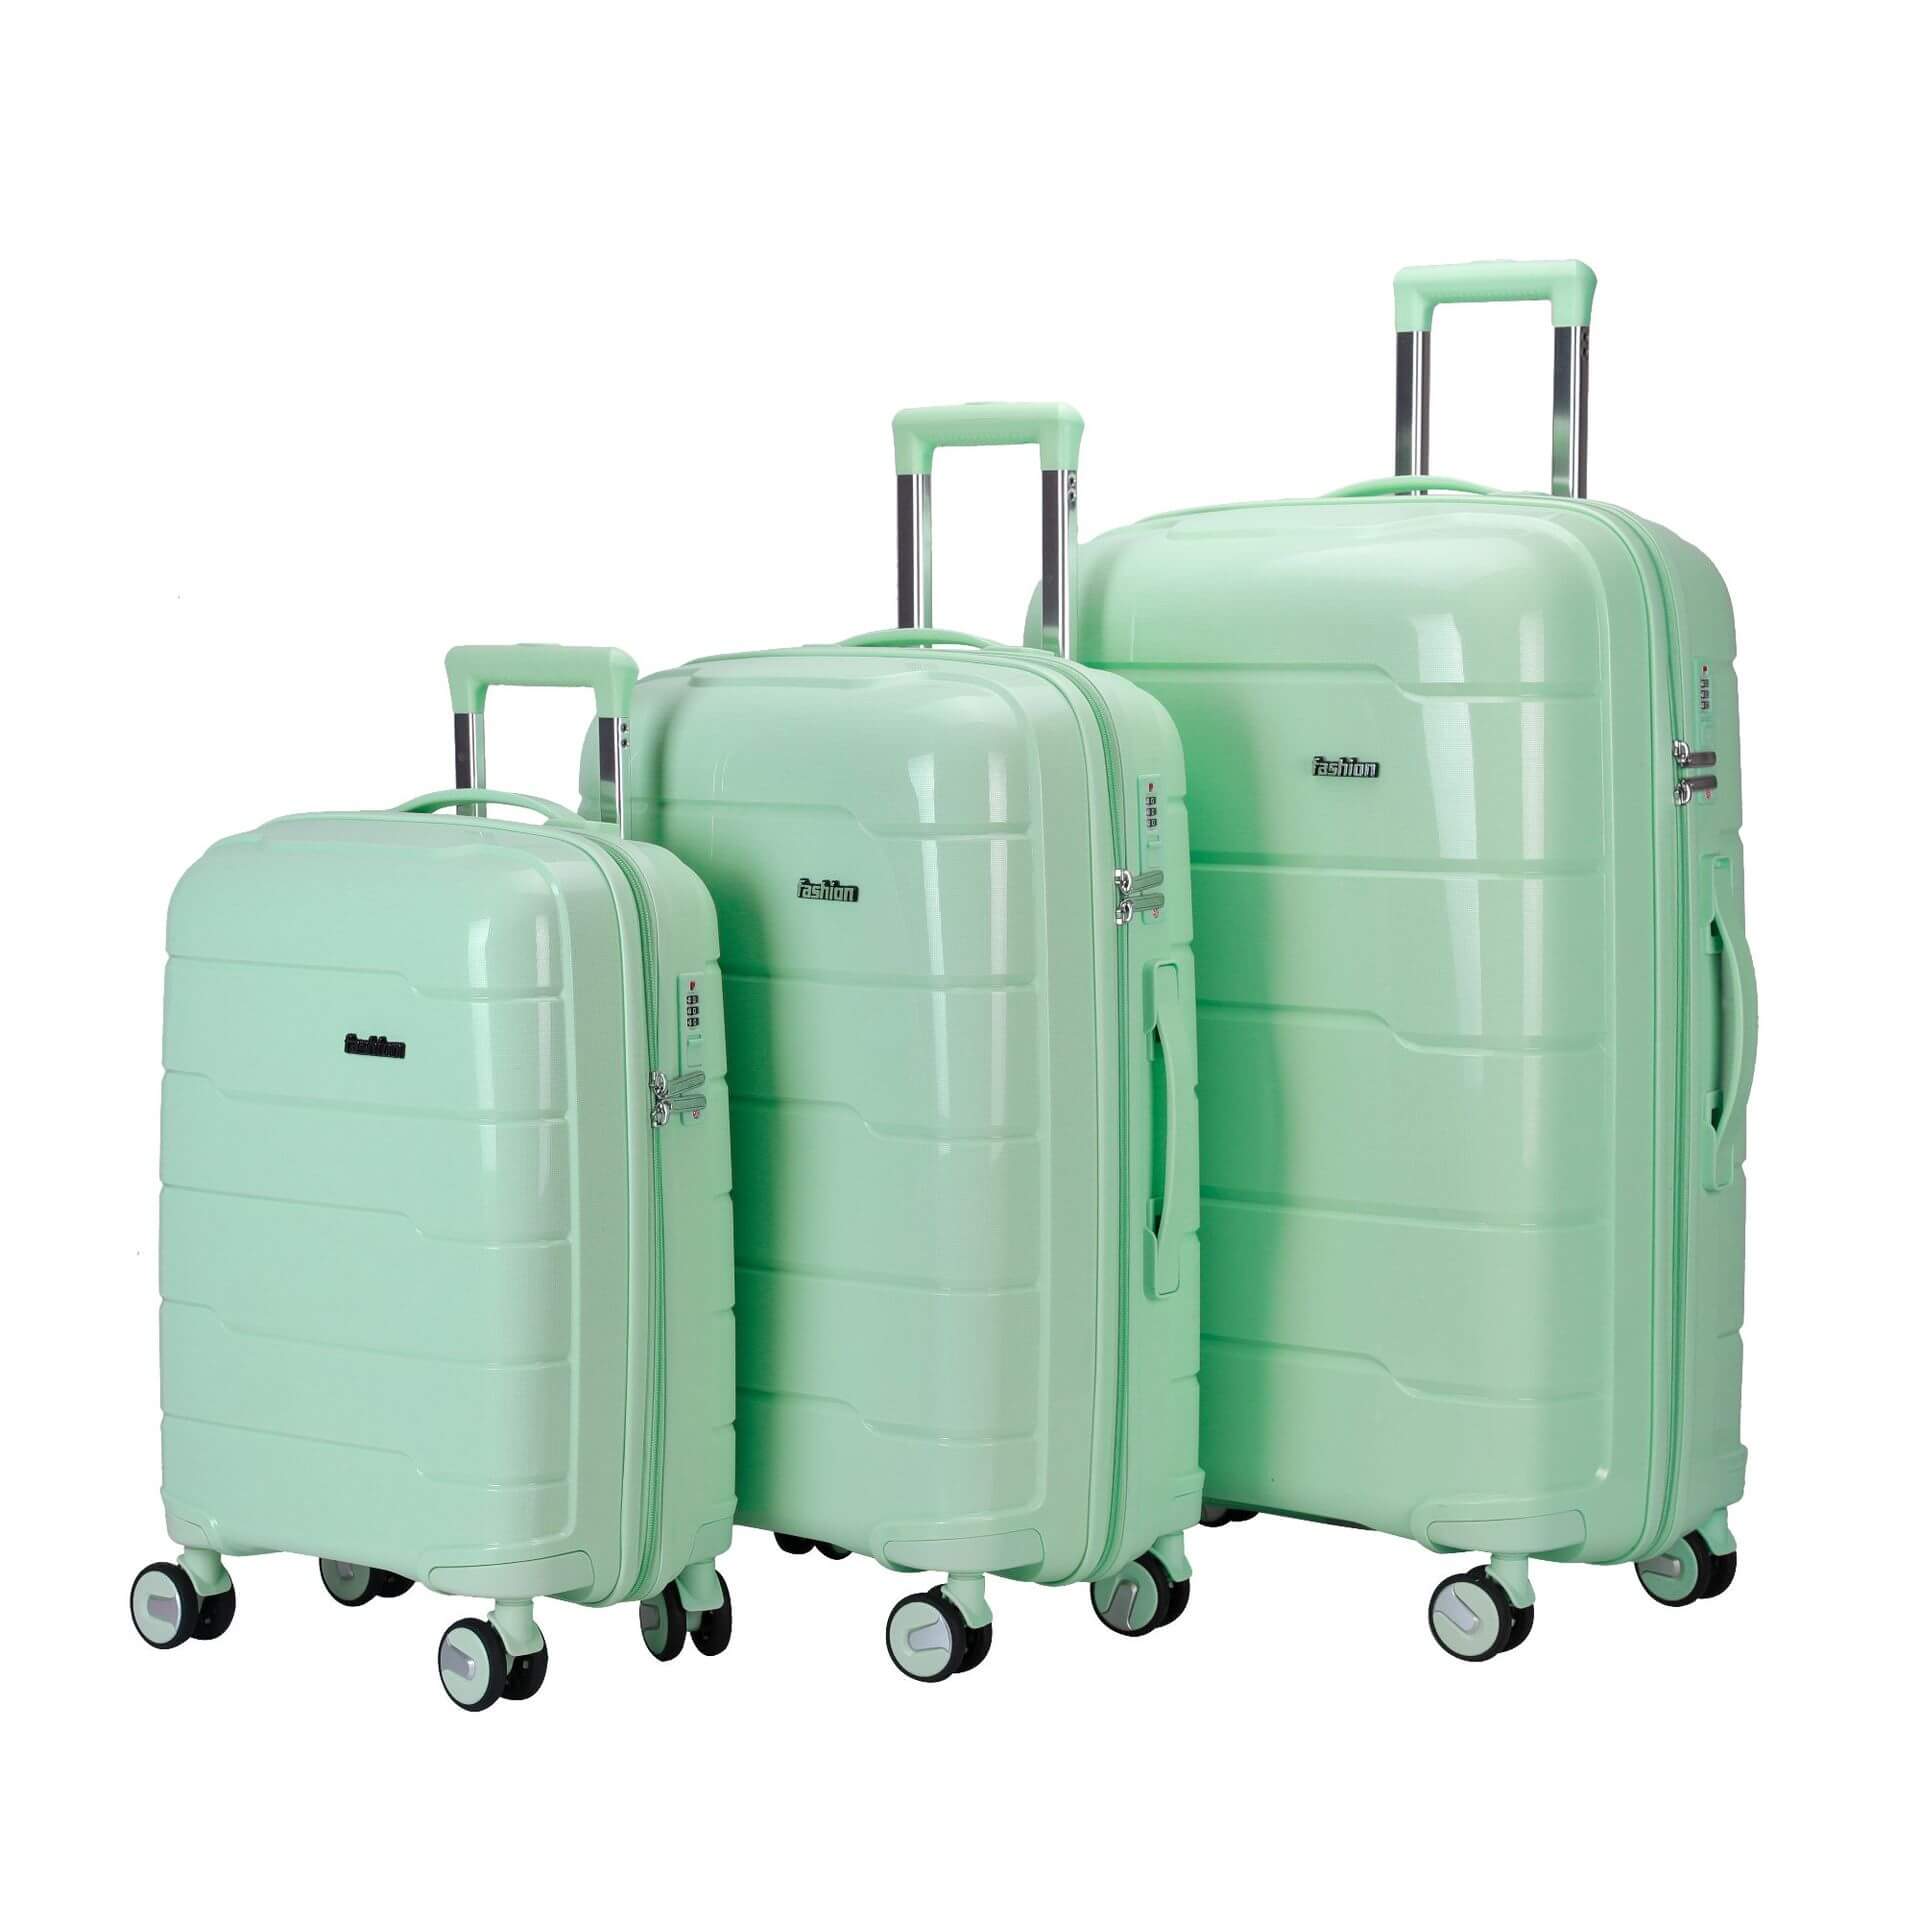 PP LUGGAGE BAIGOU FACTORY 882# 3PCS SET 20 24 28 INCH DOUBLE WHEEL MATCHING COLOR TROLLEY LUGGAGE Featured Image